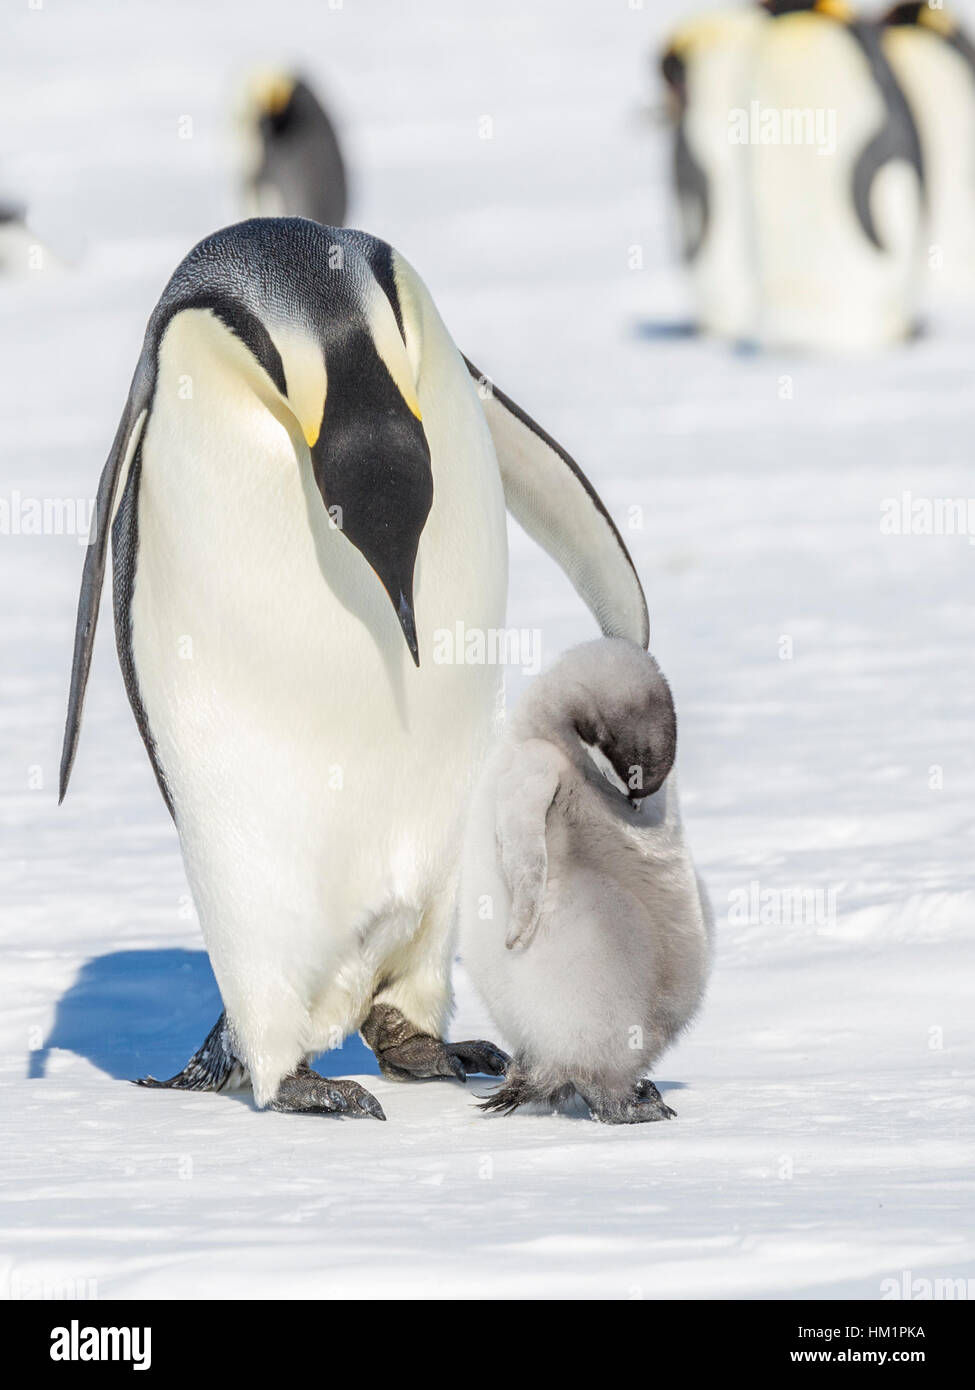 Gould Bay, Weddell Sea, Antarctica. 19th Nov, 2016. An Emperor Penguin parent appears to take an action with respect to its chick. Given that the chick is slumbering the parents wing is probably directed to wake-up the chick. *PLEASE NOTE LIVE NEWS RATES APPLY* Credit: Roger Clark/Alamy Live News Stock Photo